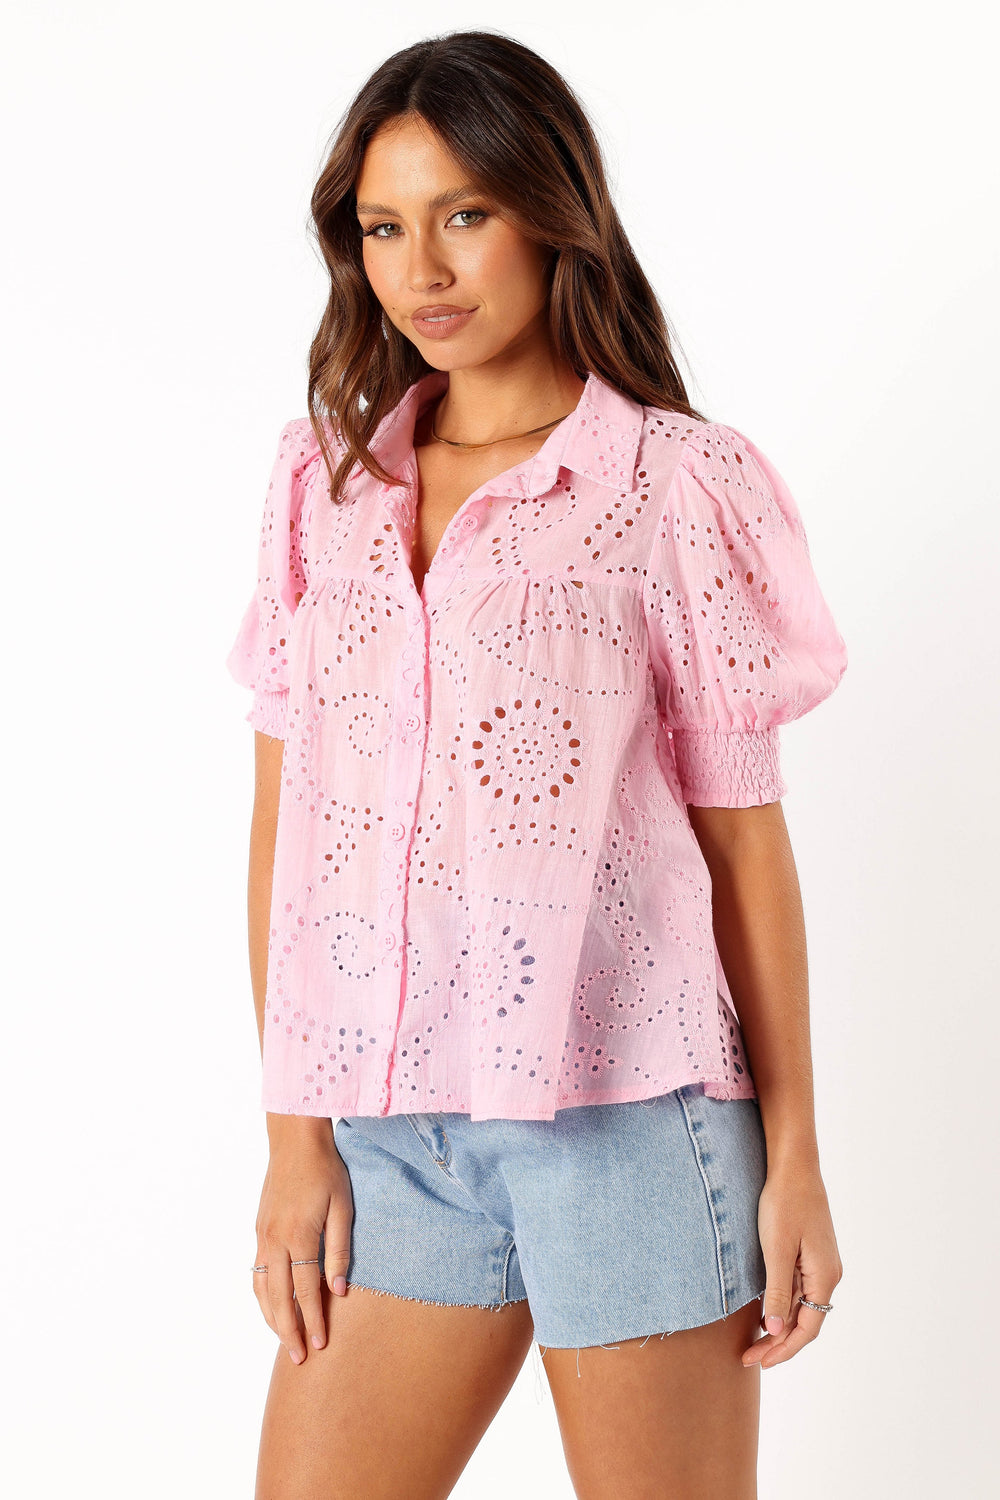 Petal and Pup USA TOPS Janelle Top - Pink